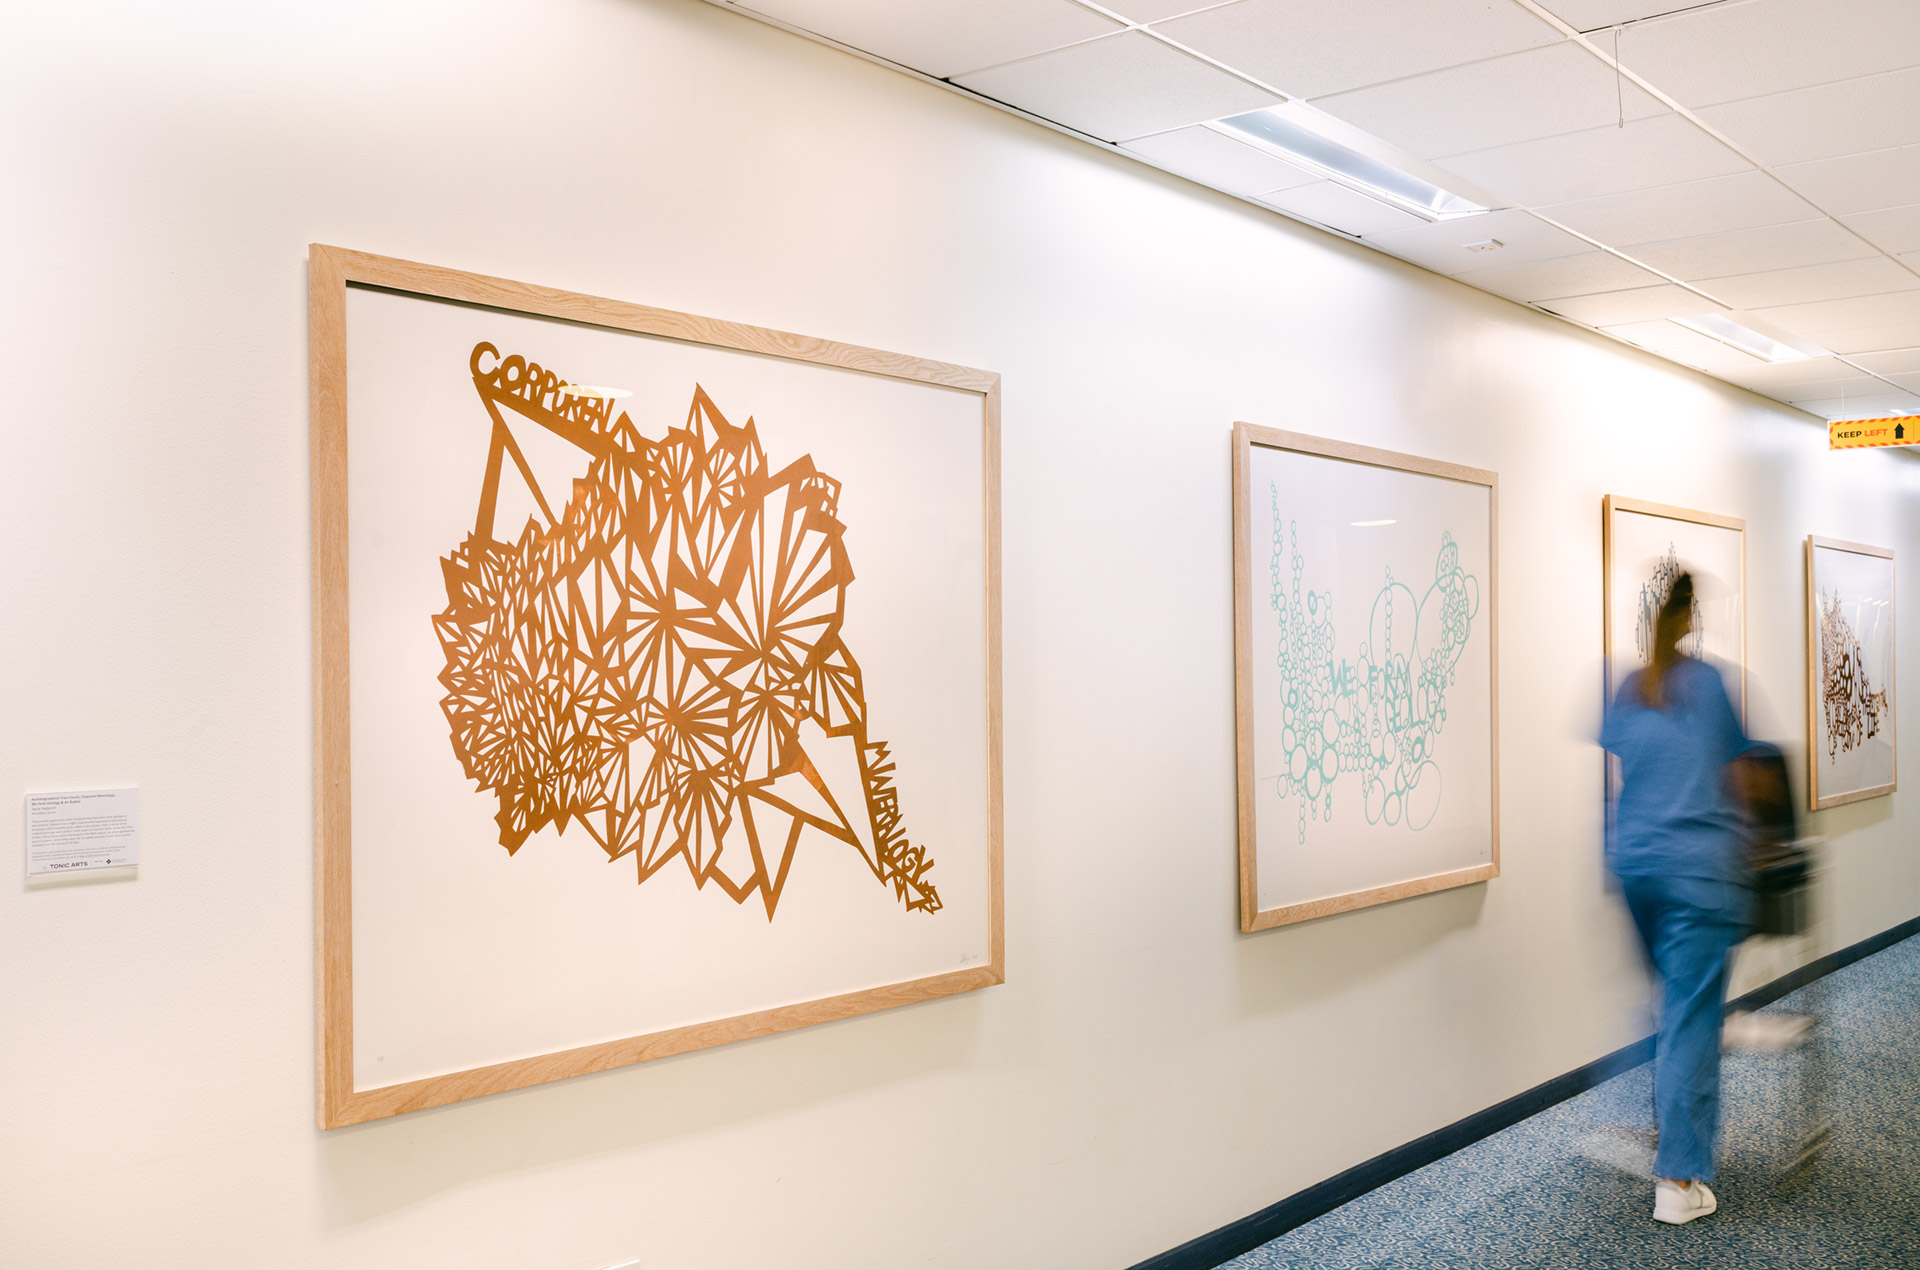 Woodblock prints by Ilana Halperin in the Tonic Arts Collection. From L to R: Corporeal Minerology, We Form Geology, Autobiographical Trace Fossils , An air Bubble, the Potential Origin of Life